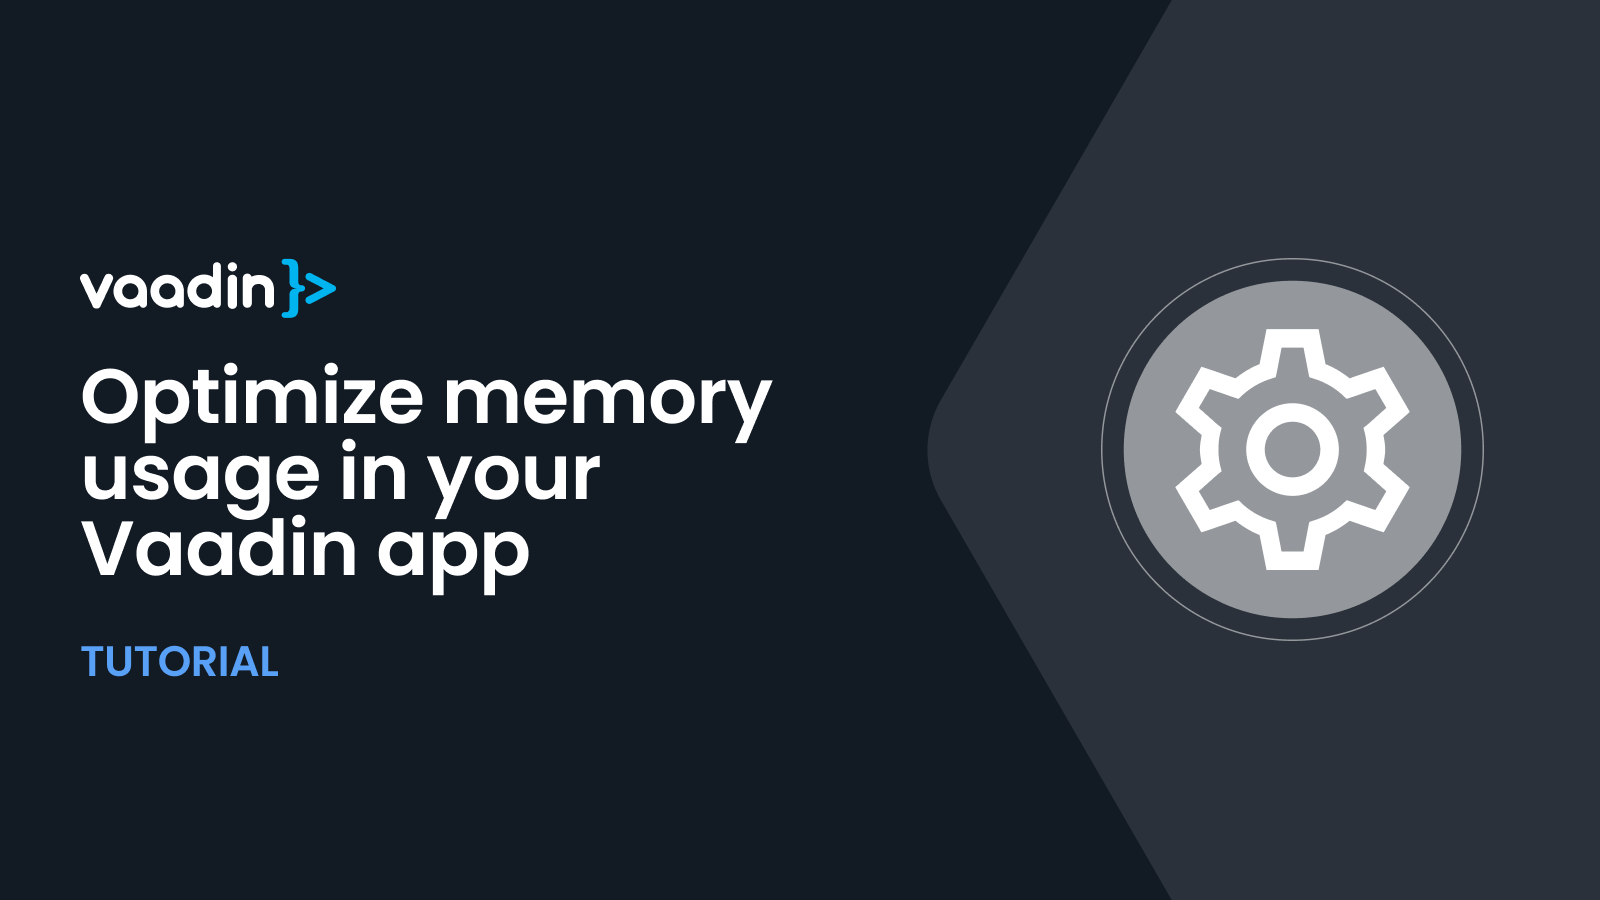 Five tips for optimizing memory usage in your Vaadin application